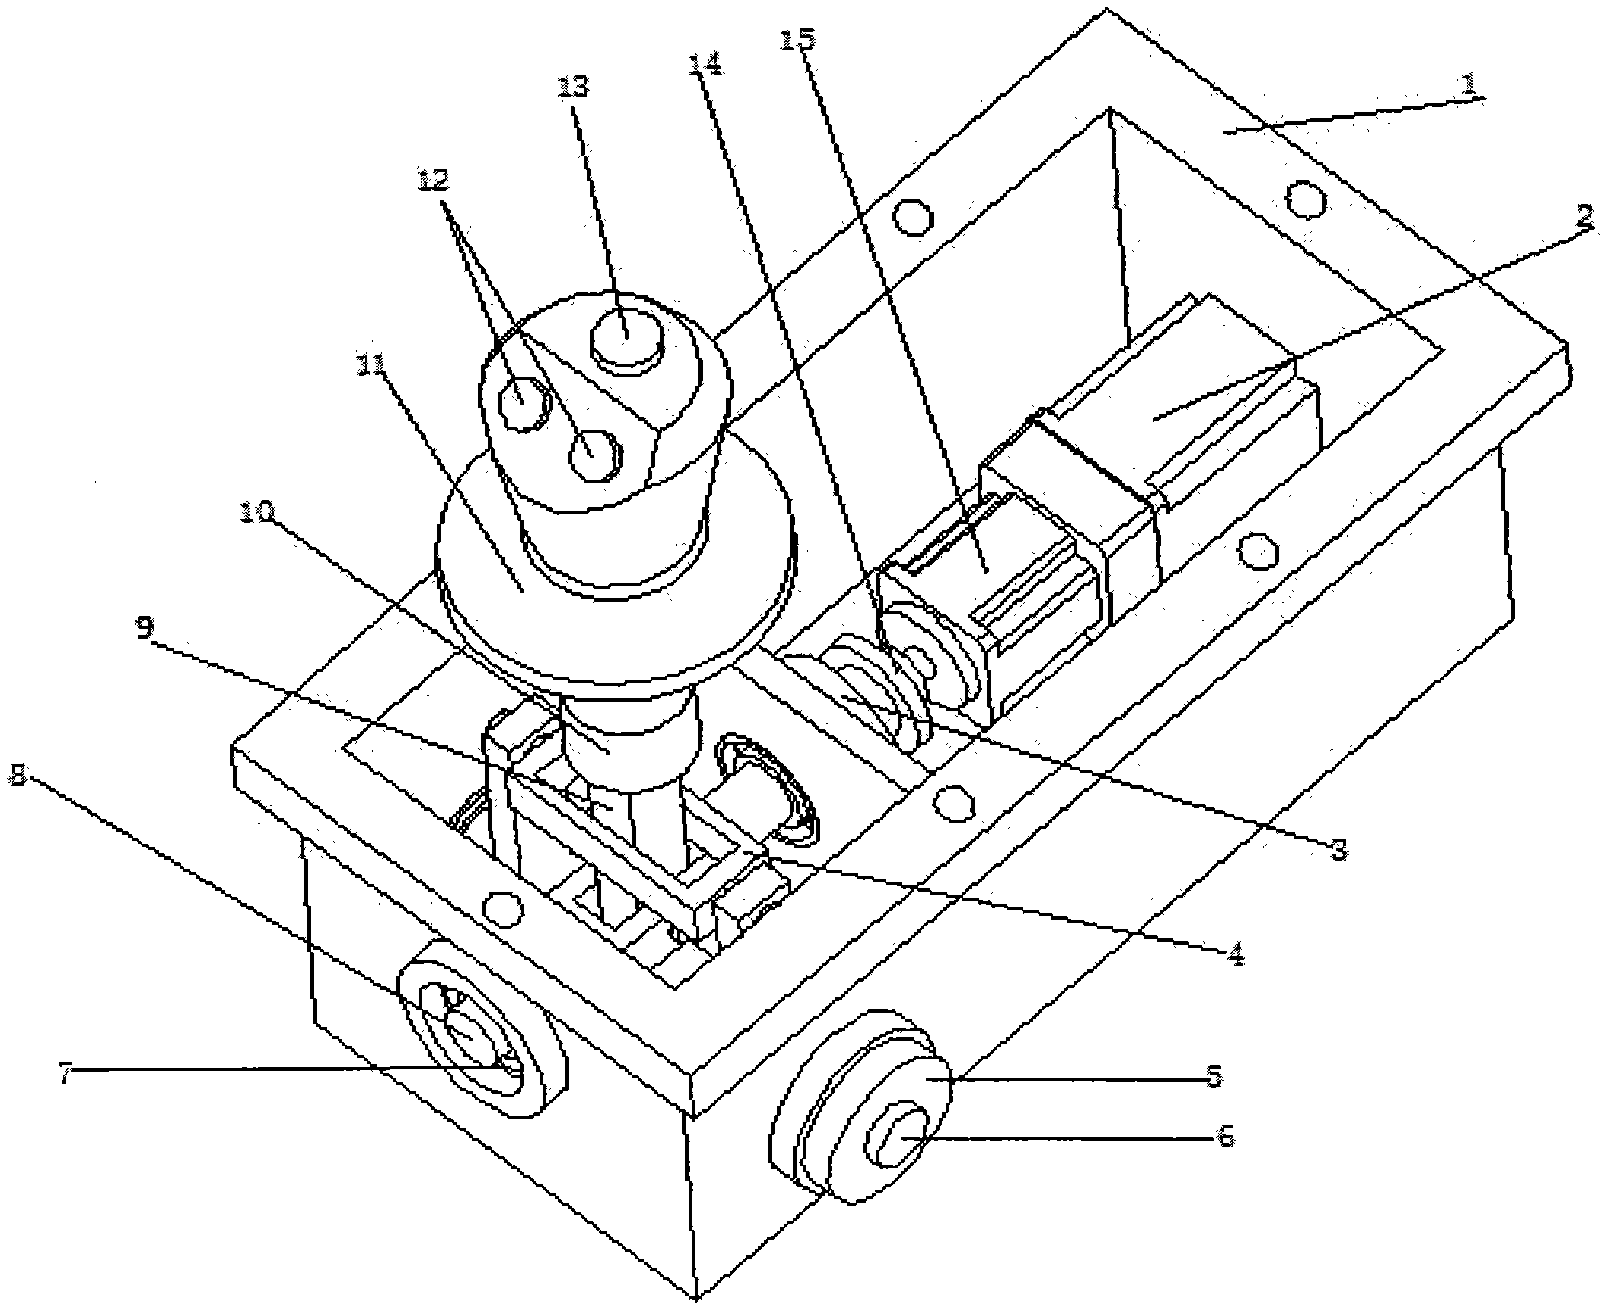 Automobile-line-control-system-based control lever device integrating steering, braking and speed change